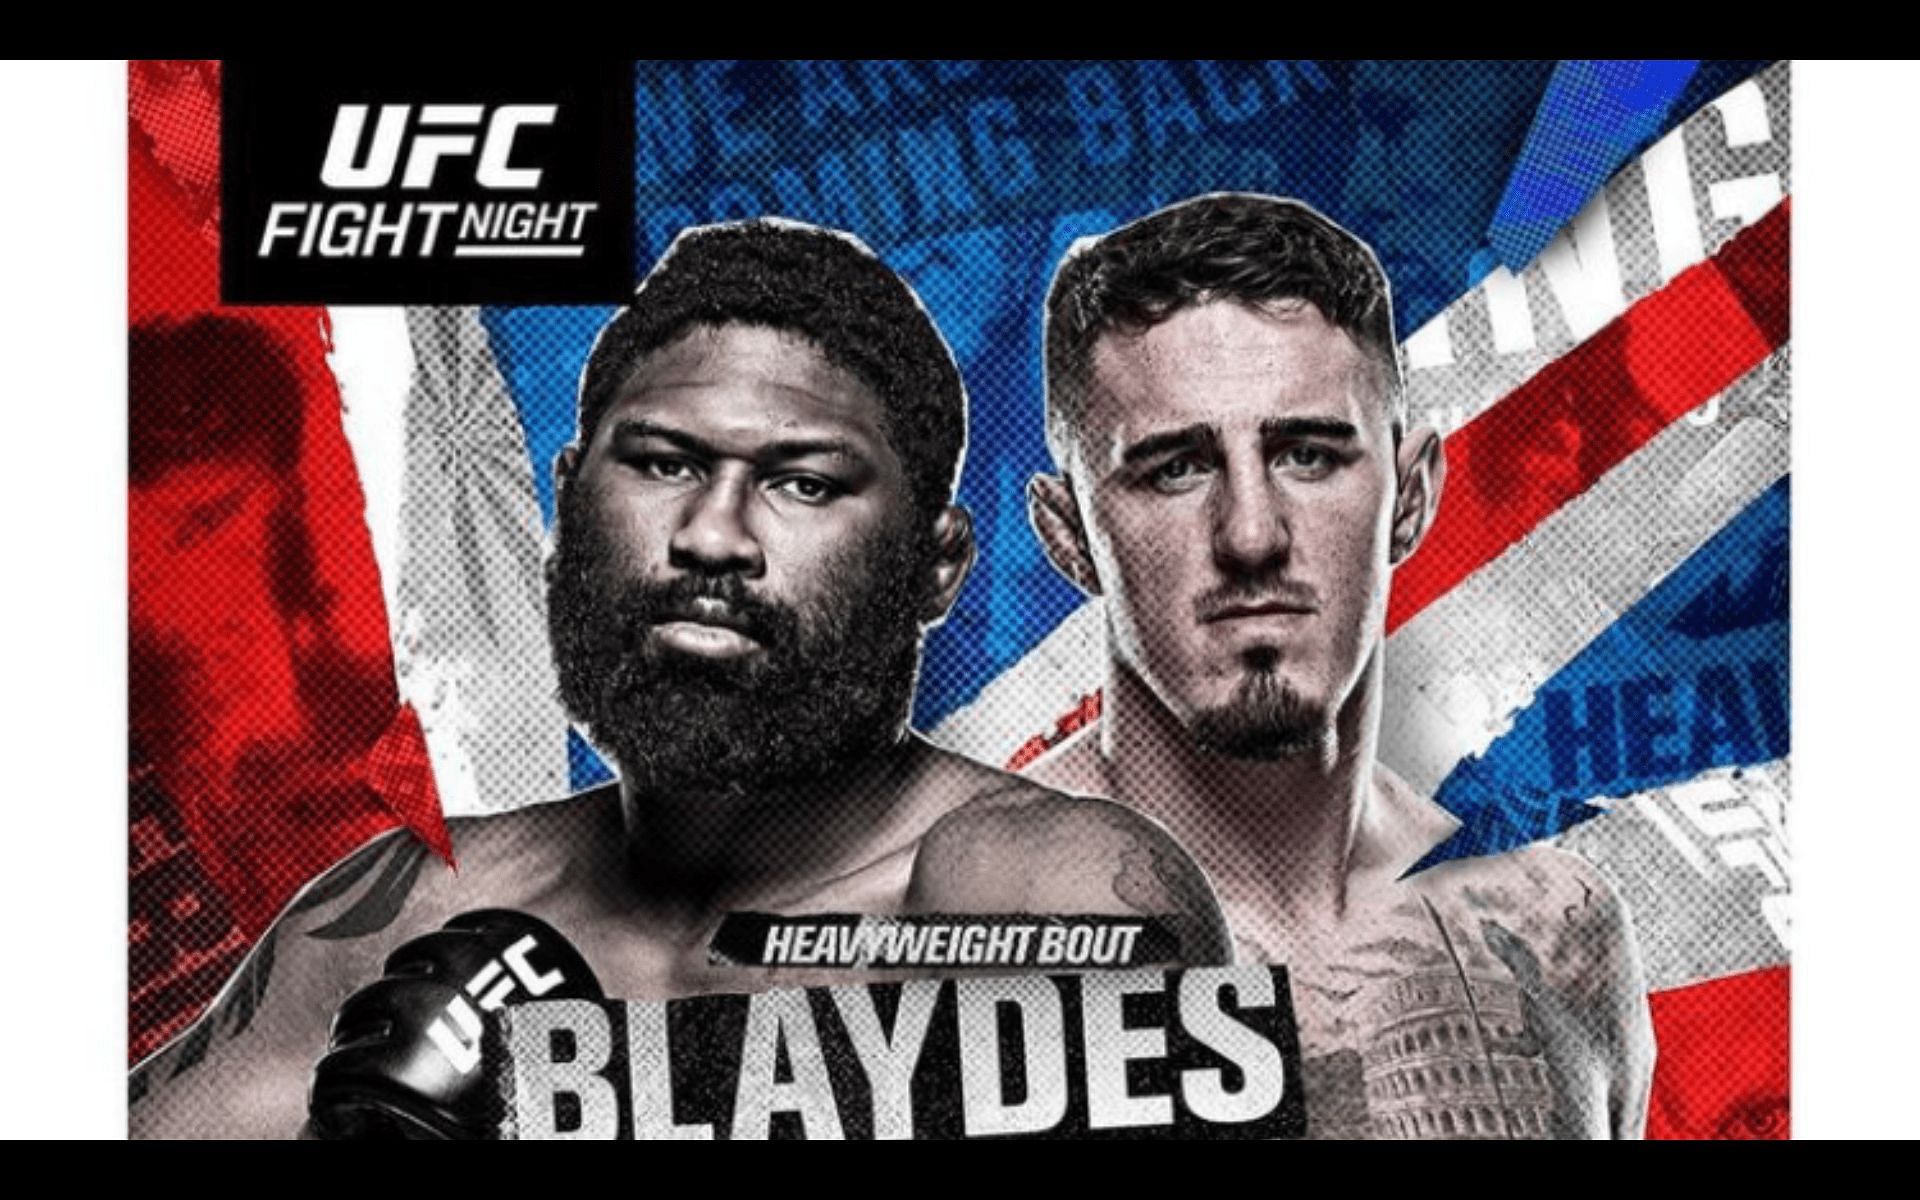 Curtis Blaydes (left) and Tom Aspinall (right) [Image Courtesy: @ufc on Instagram]